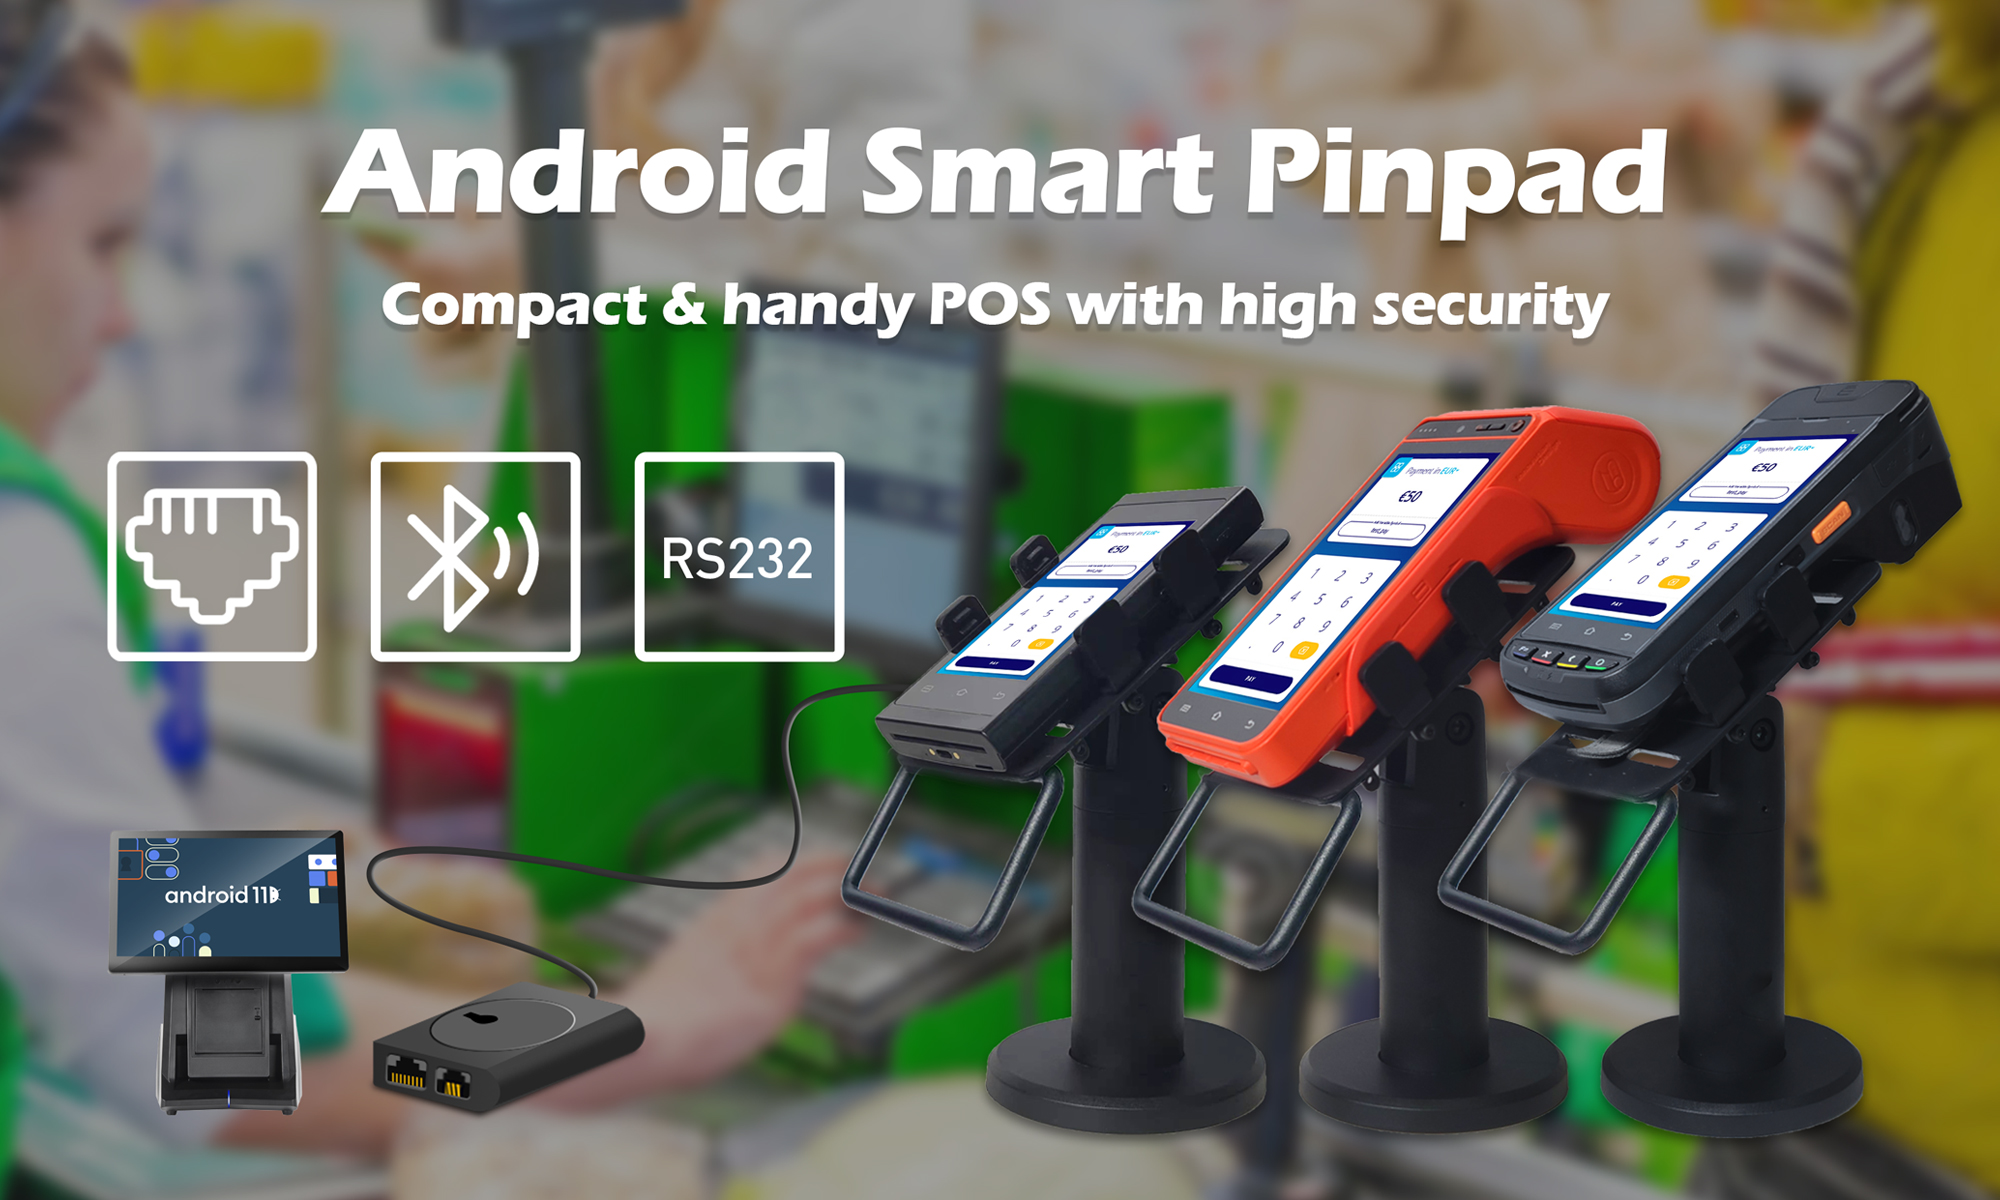 Android Smart Pinpad, a compact and handy POS with high security features